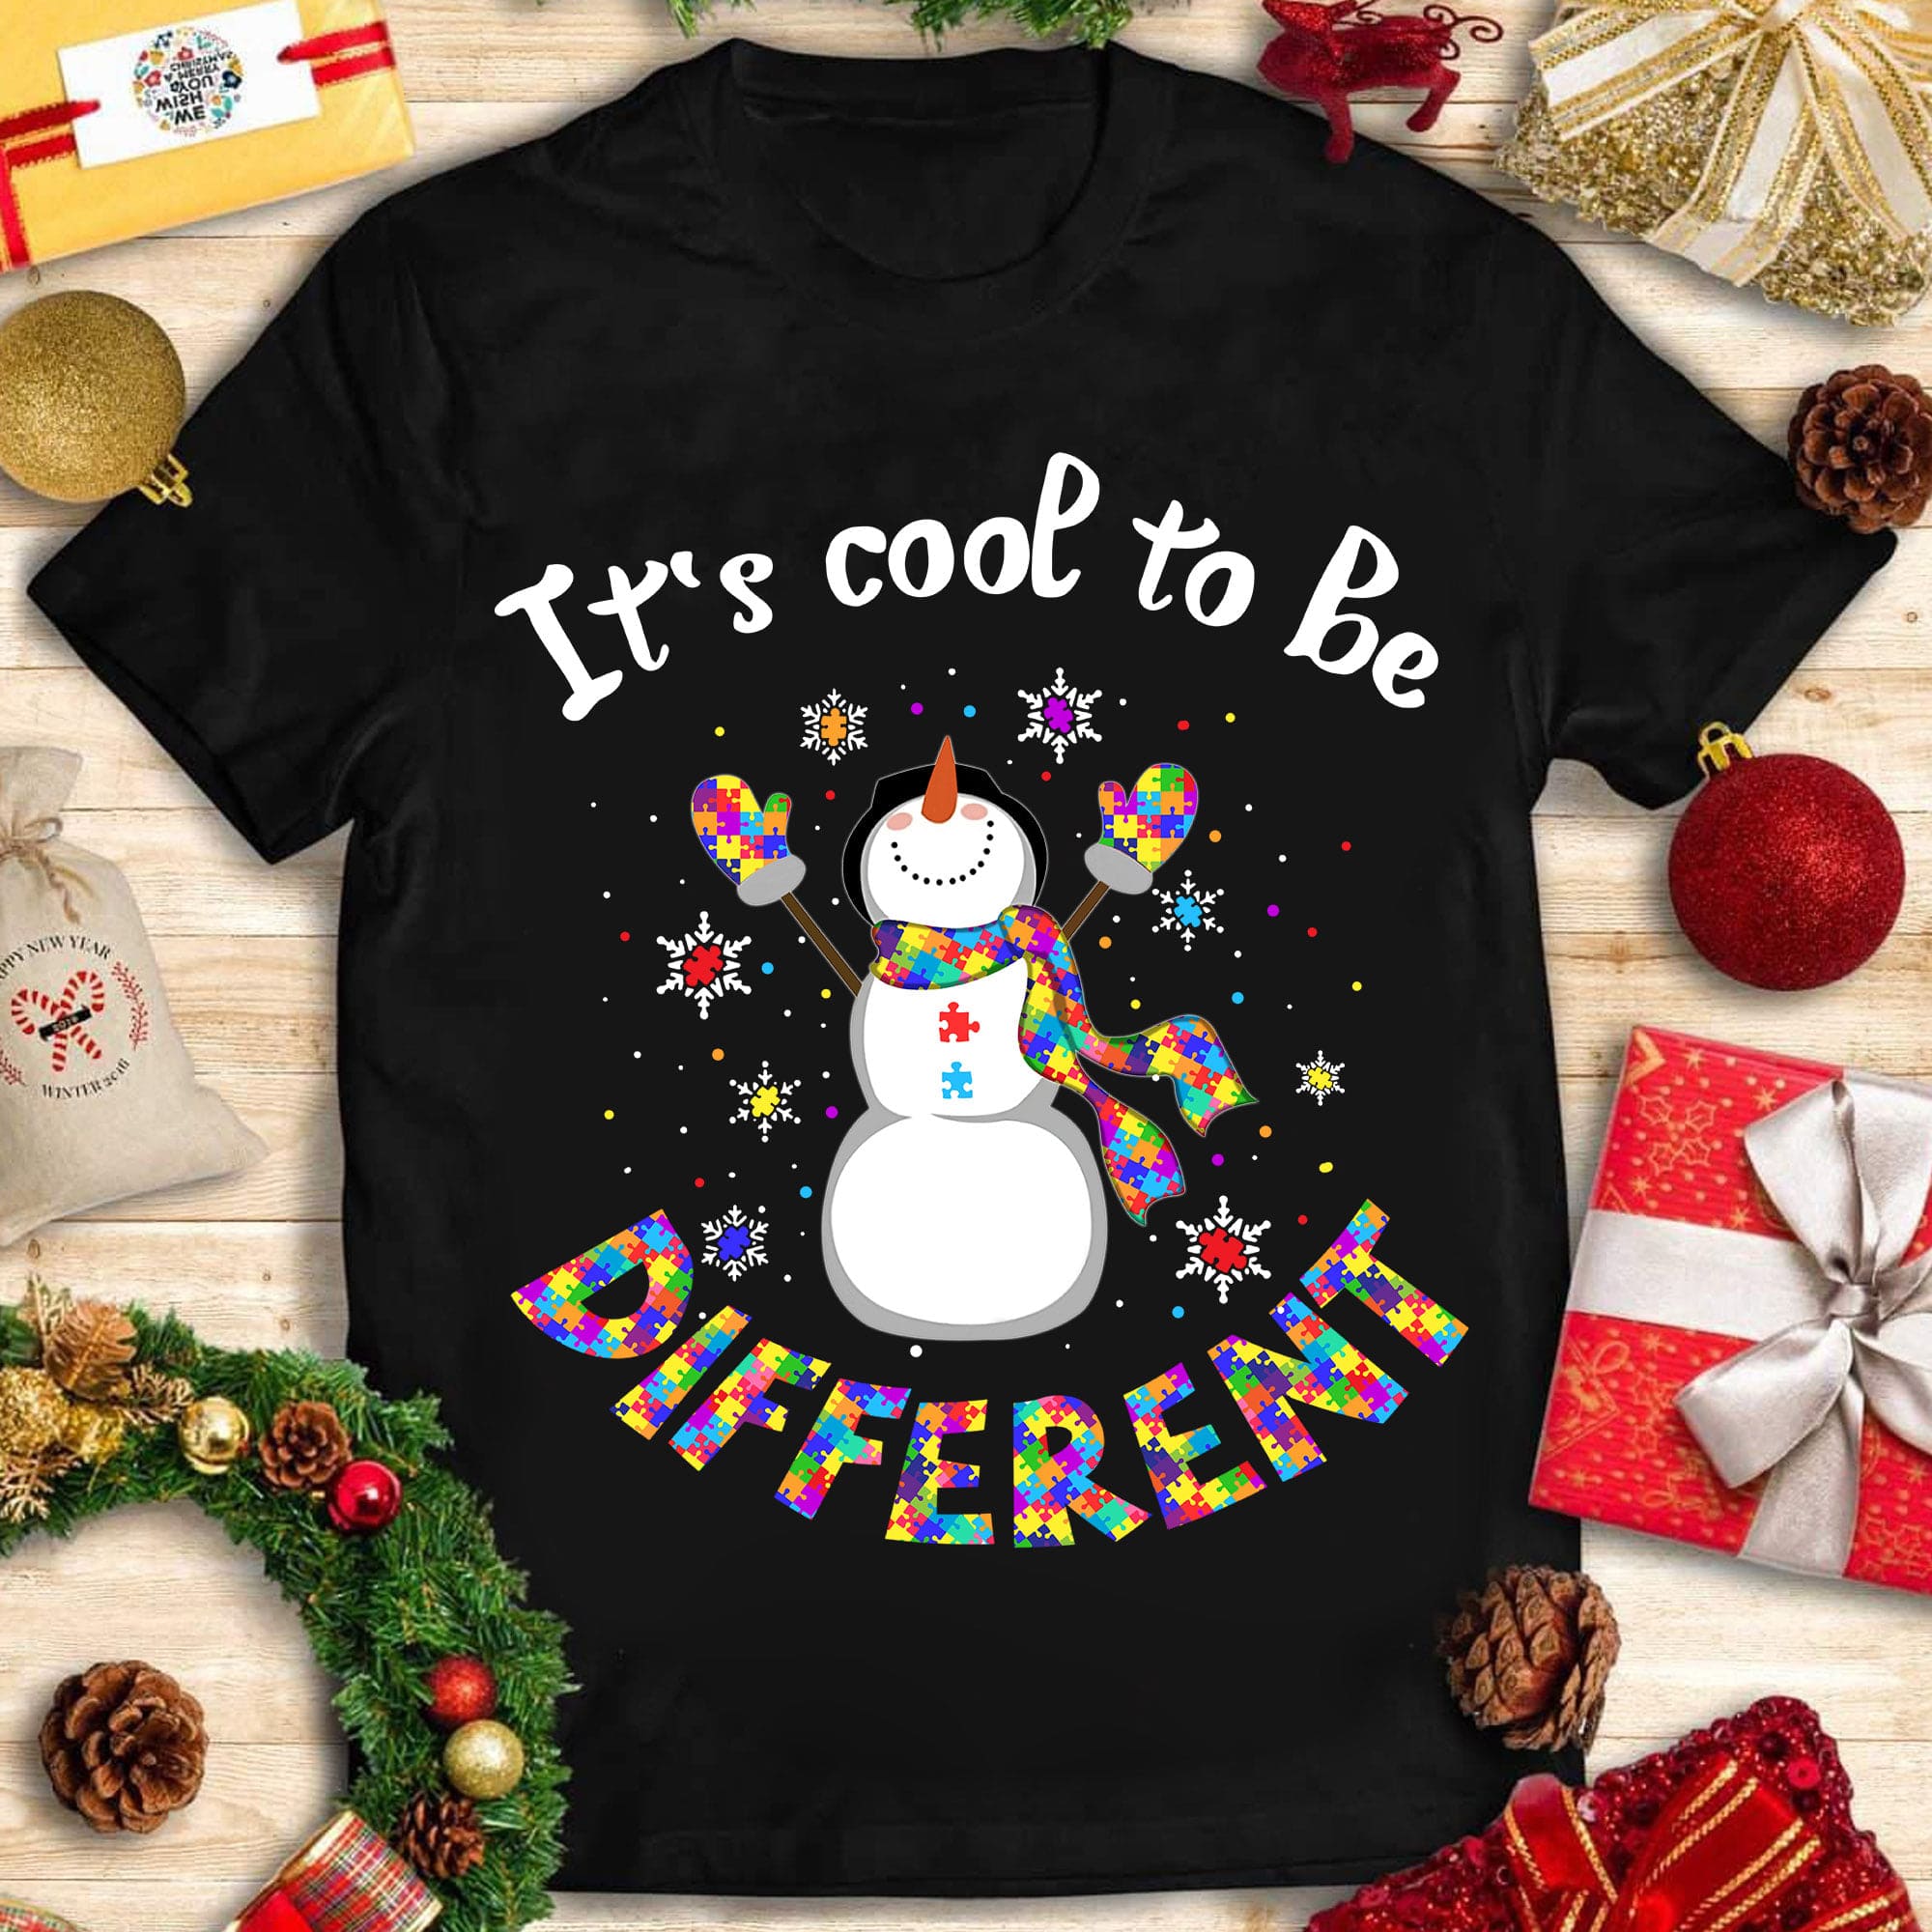 It's cool to be different - Christmas snowman graphic, Autism awareness